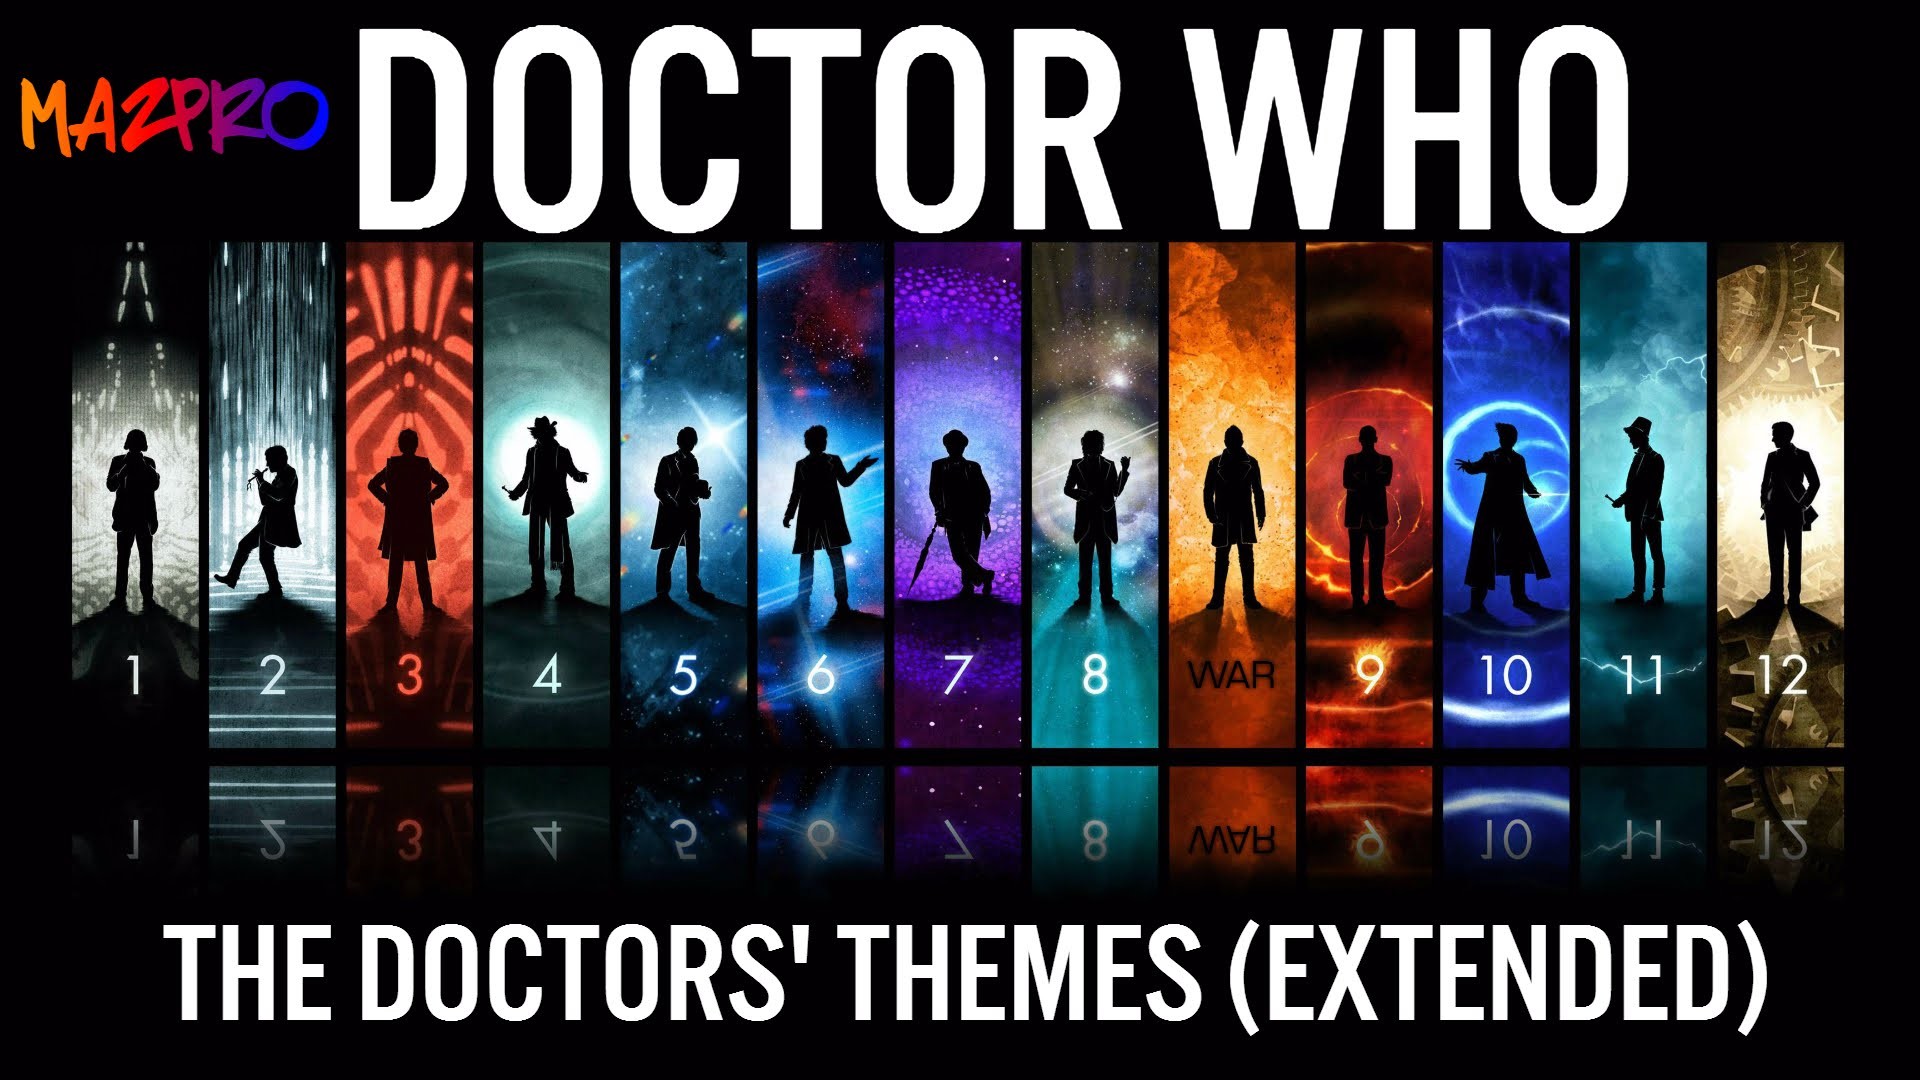 Doctor Who The Doctors Themes 2,3,4,7,8,9,10,11,12, War EXTENDED – YouTube